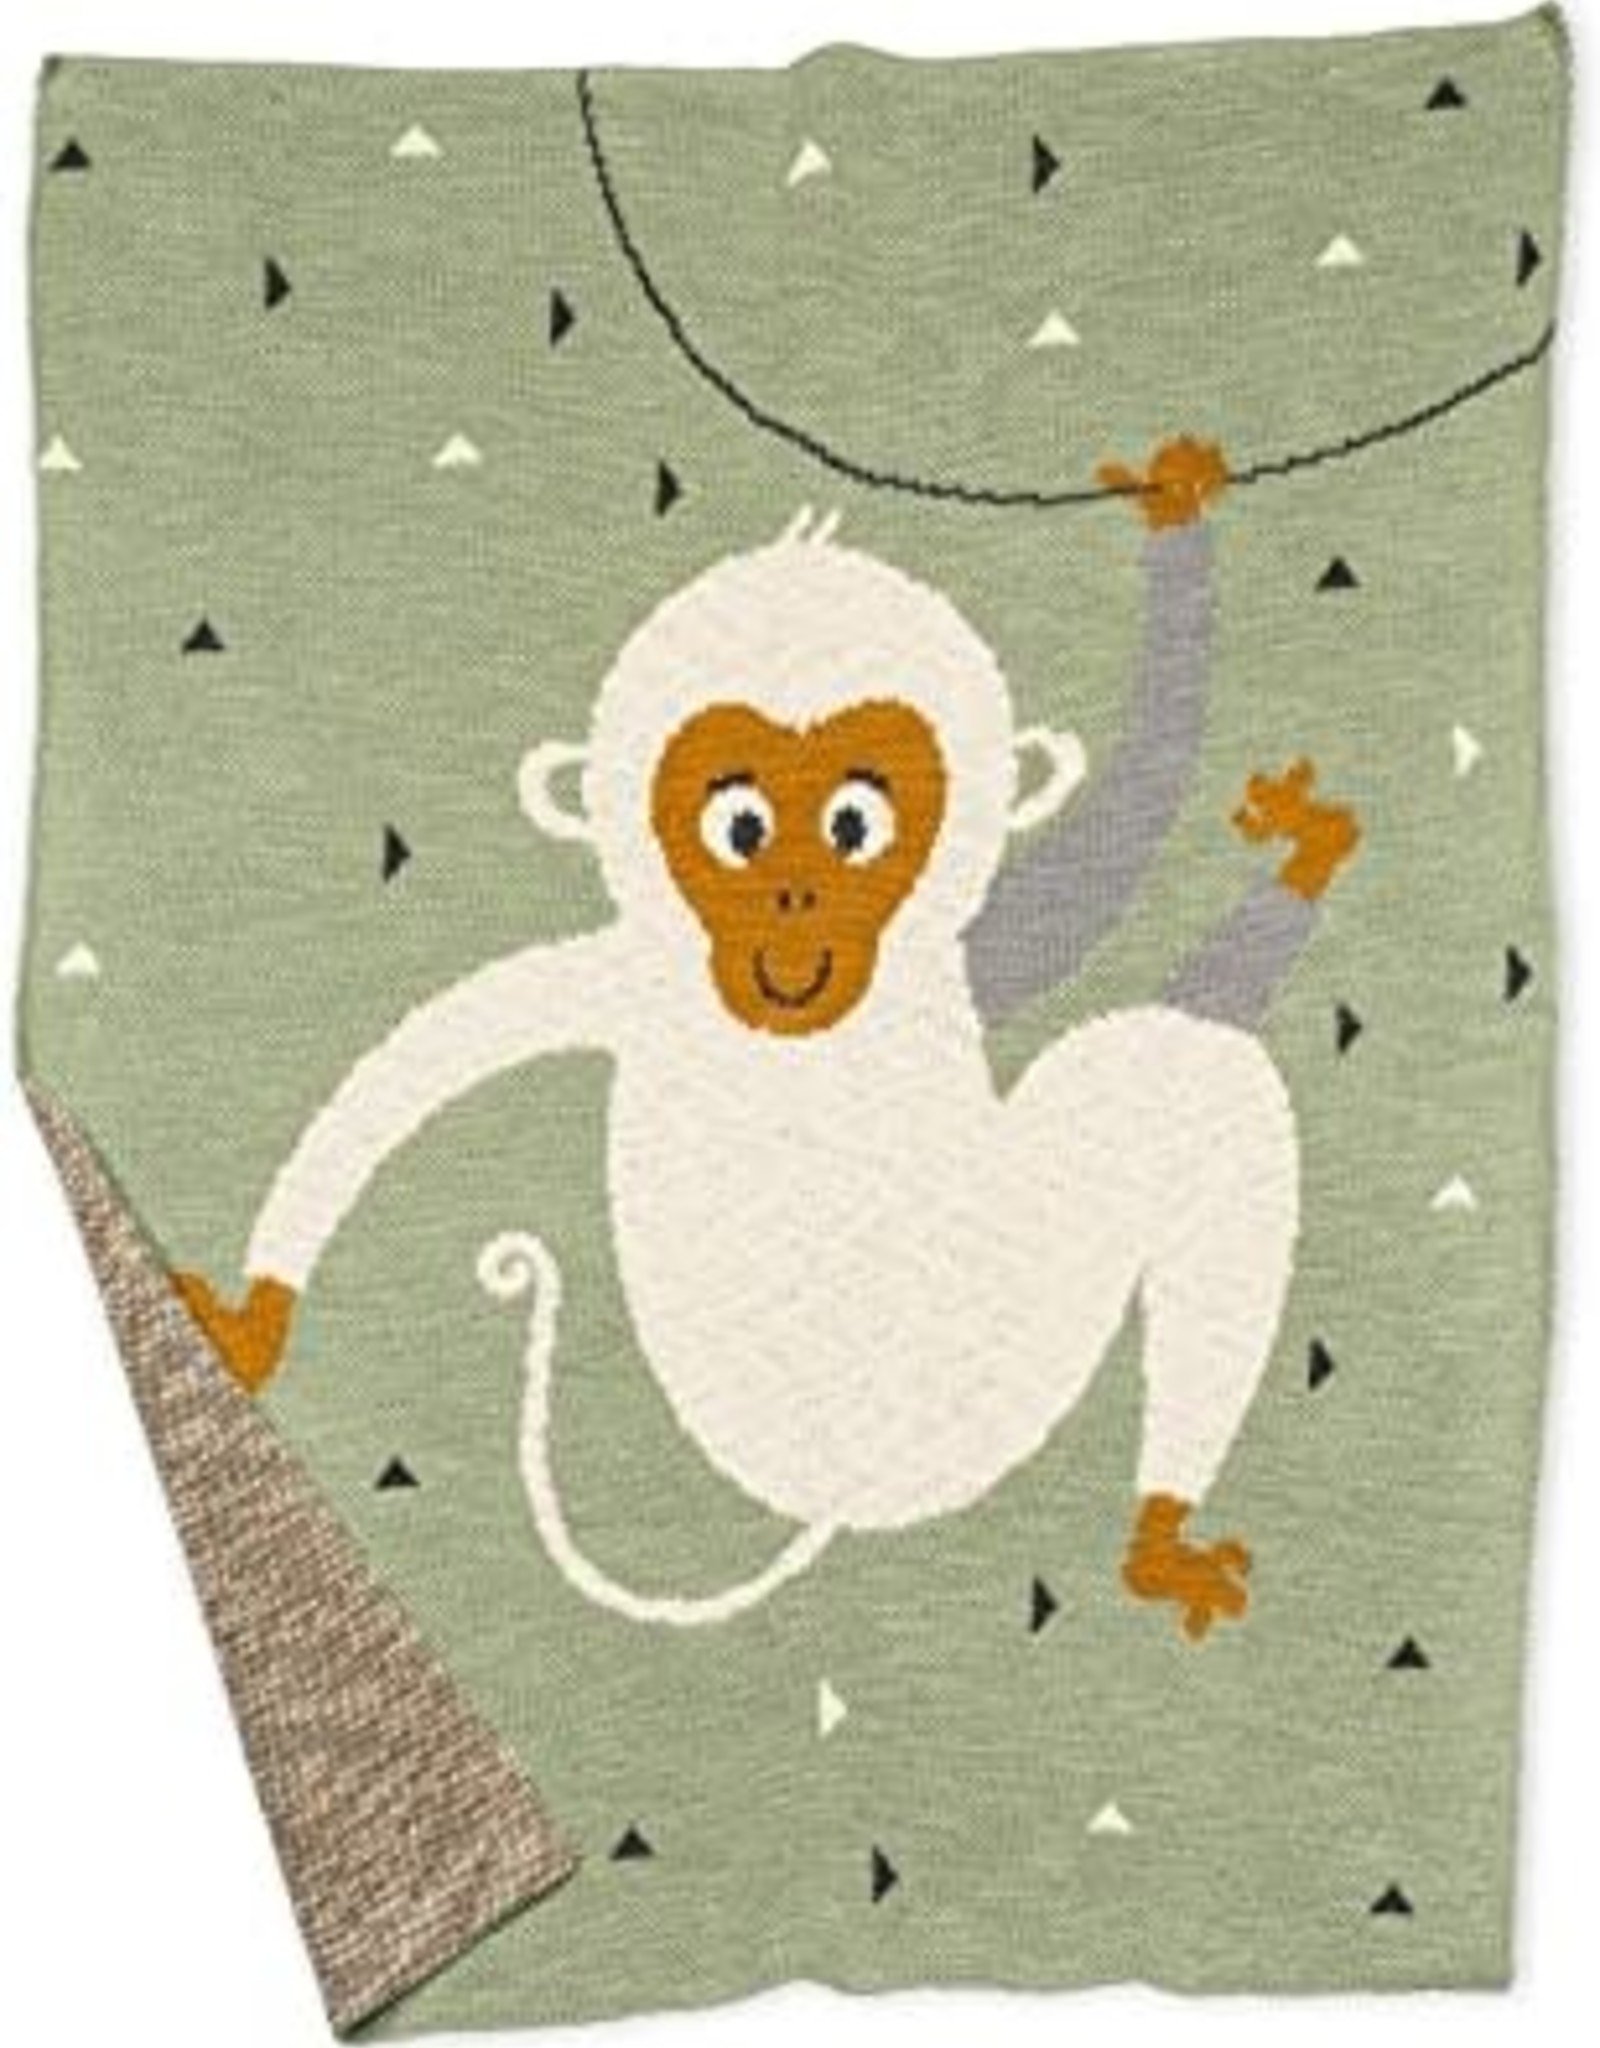 Cotton Knit Baby Blanket with Monkey